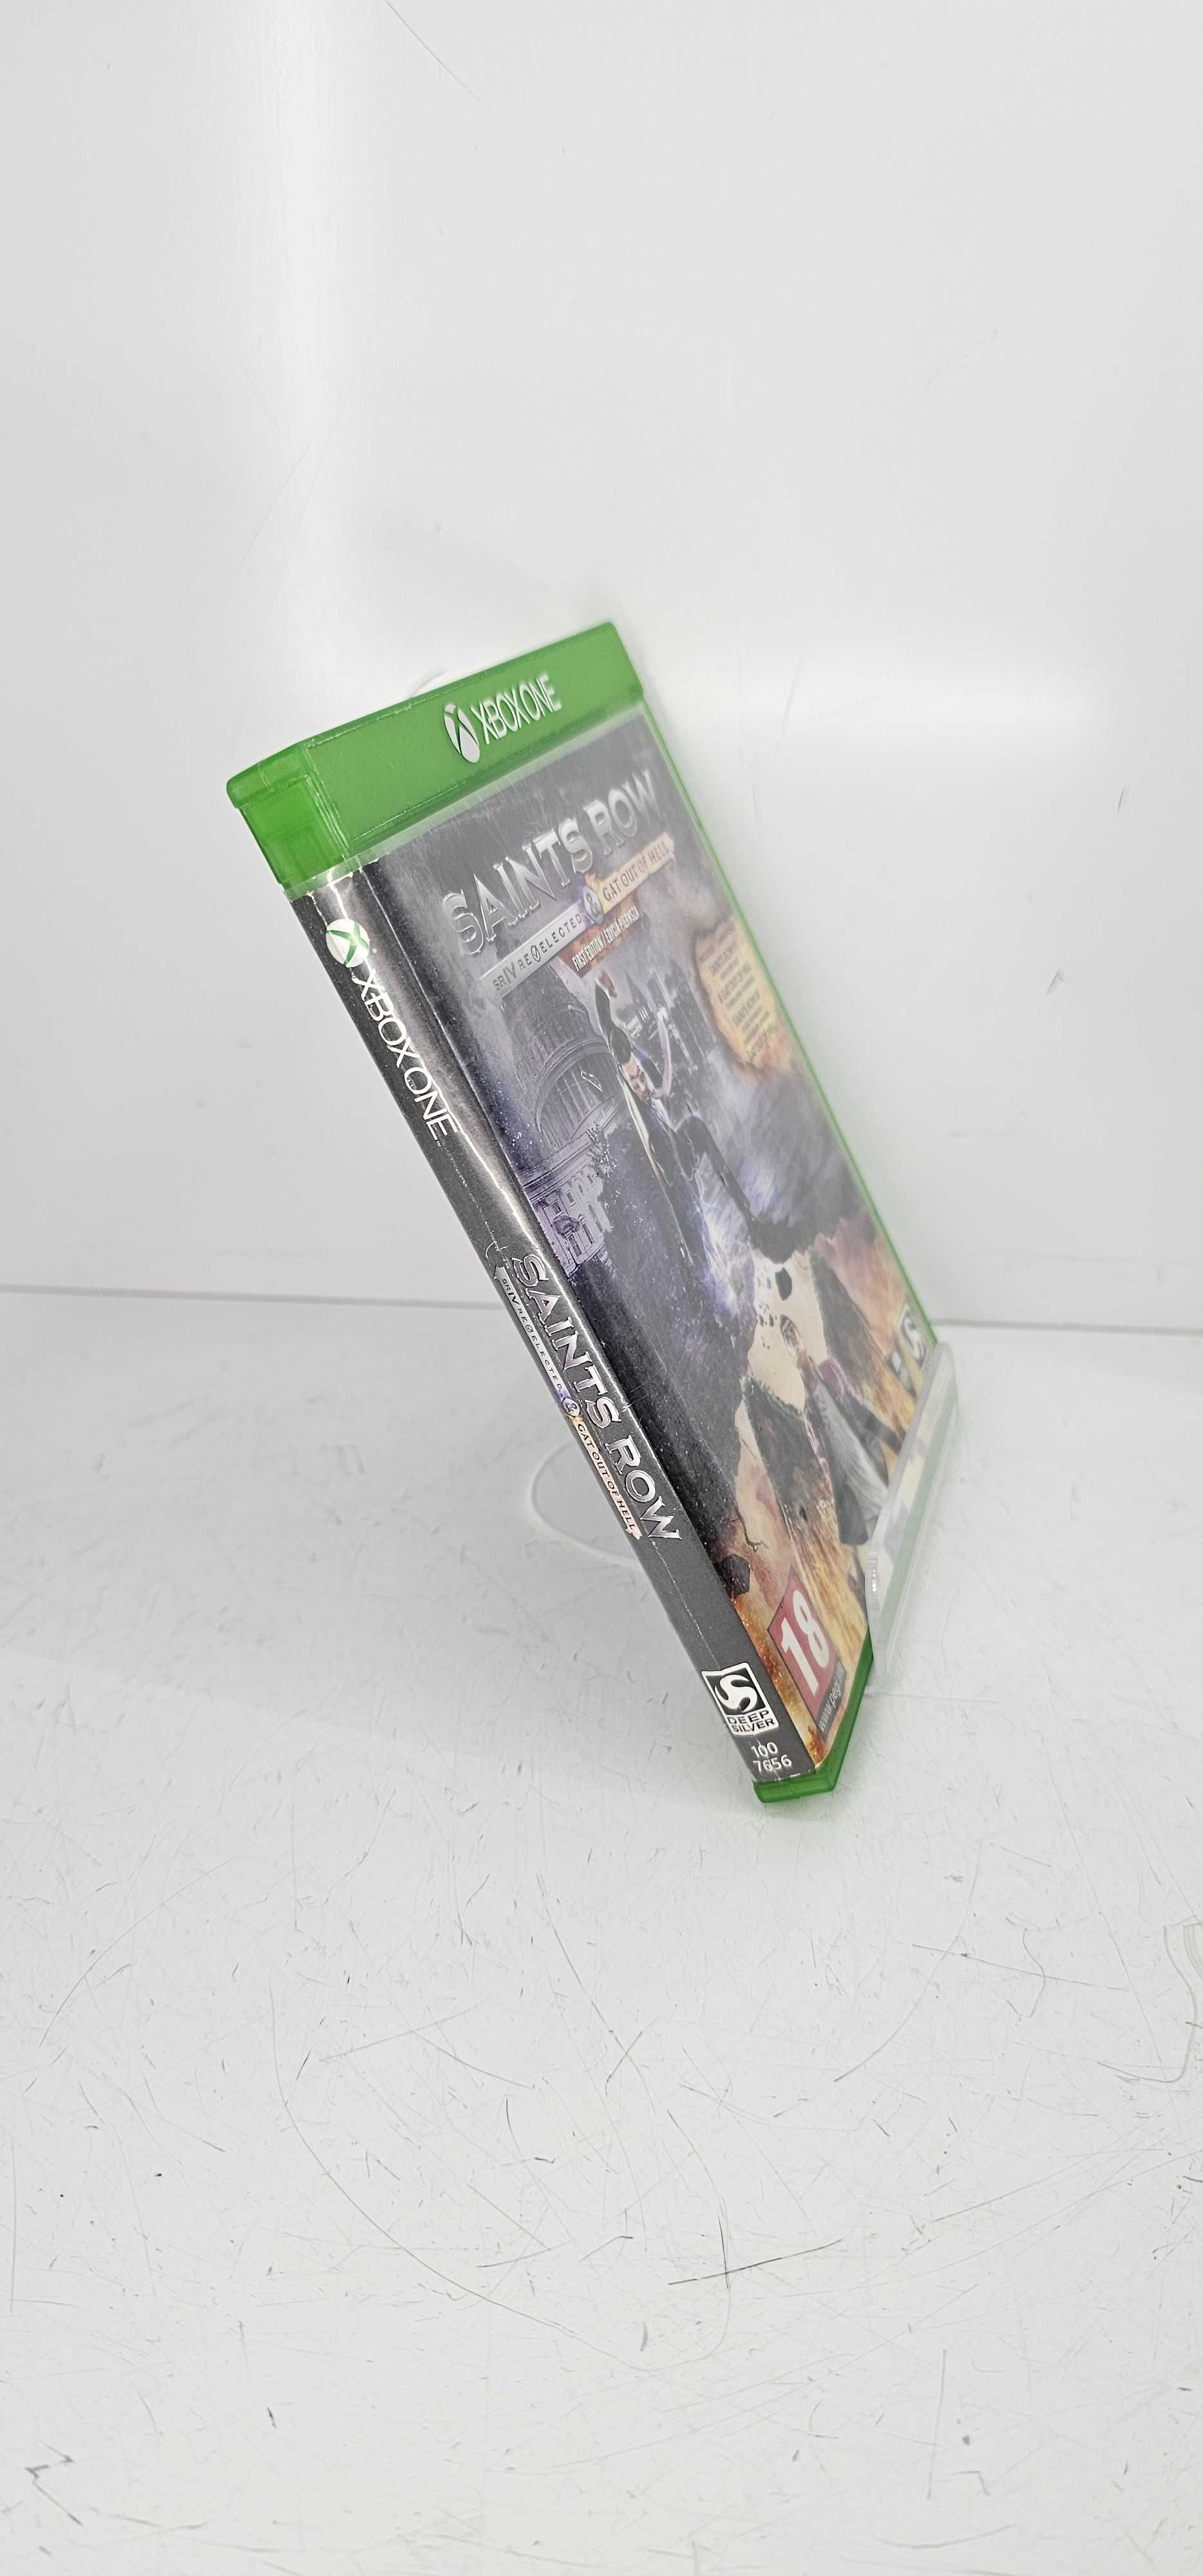 Gra Saints Row IV Re-Elected & Gat Out of Hell First Edition